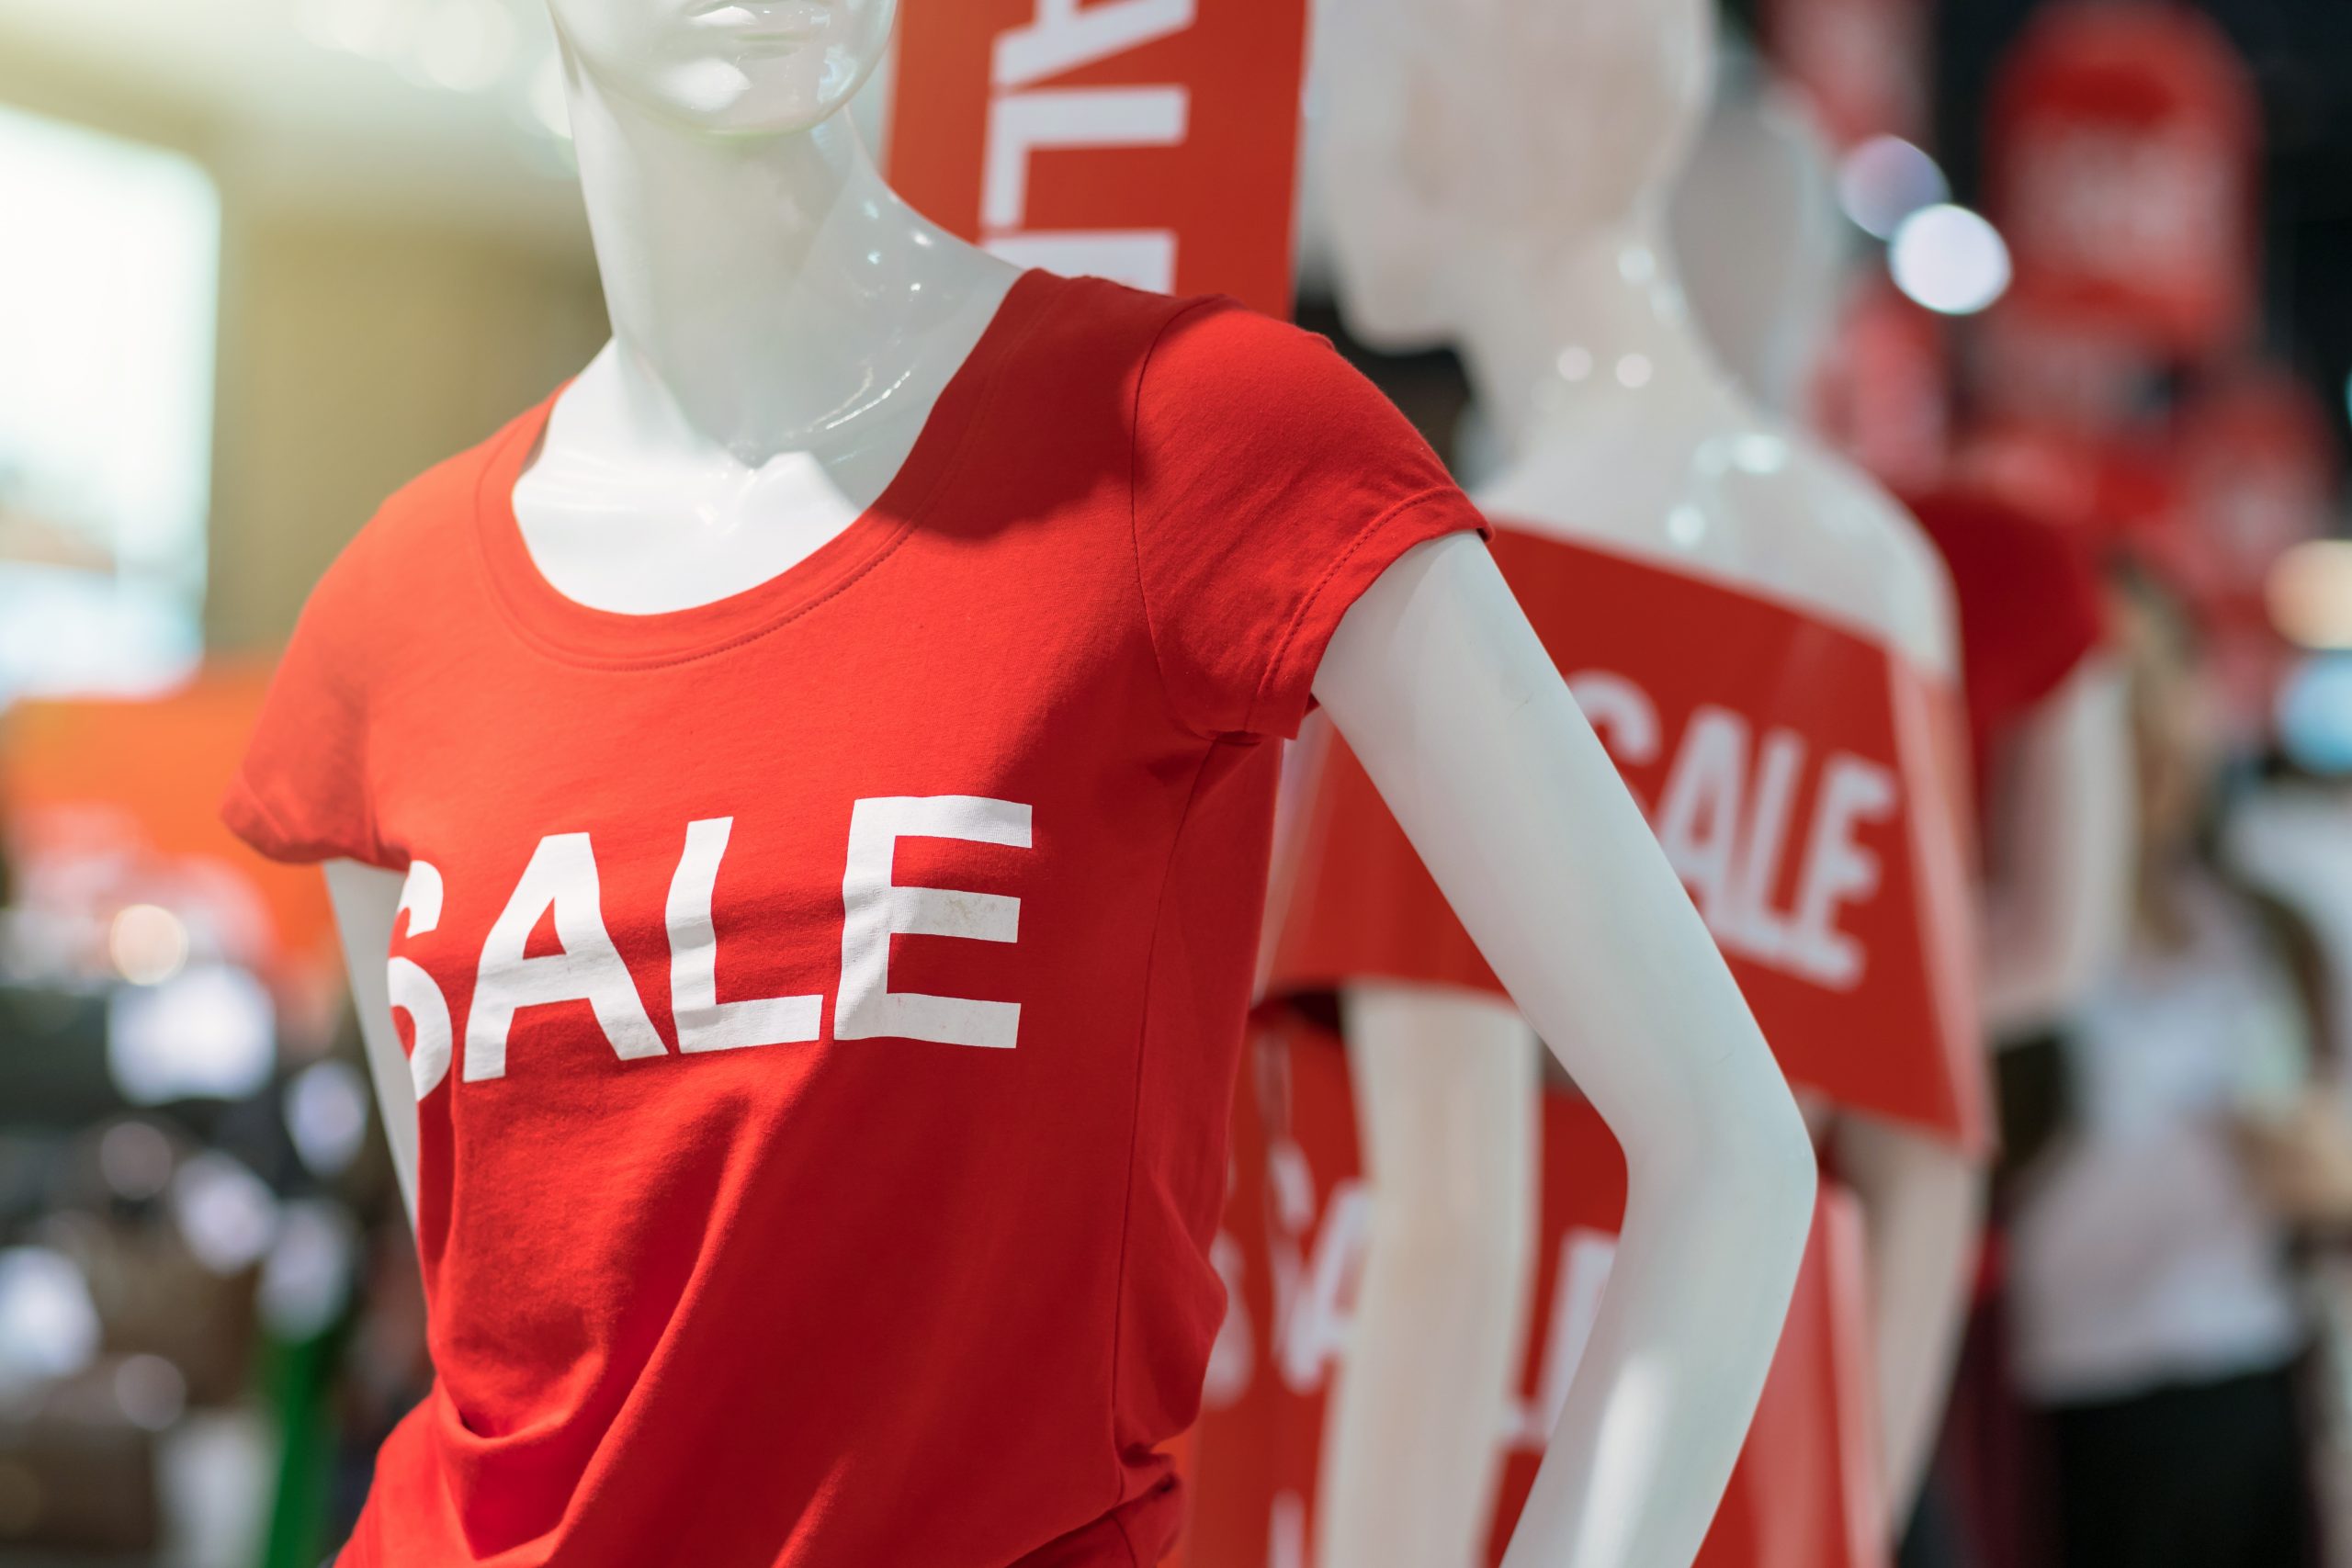 Mannequin in a red shirt with "SALE" written on it